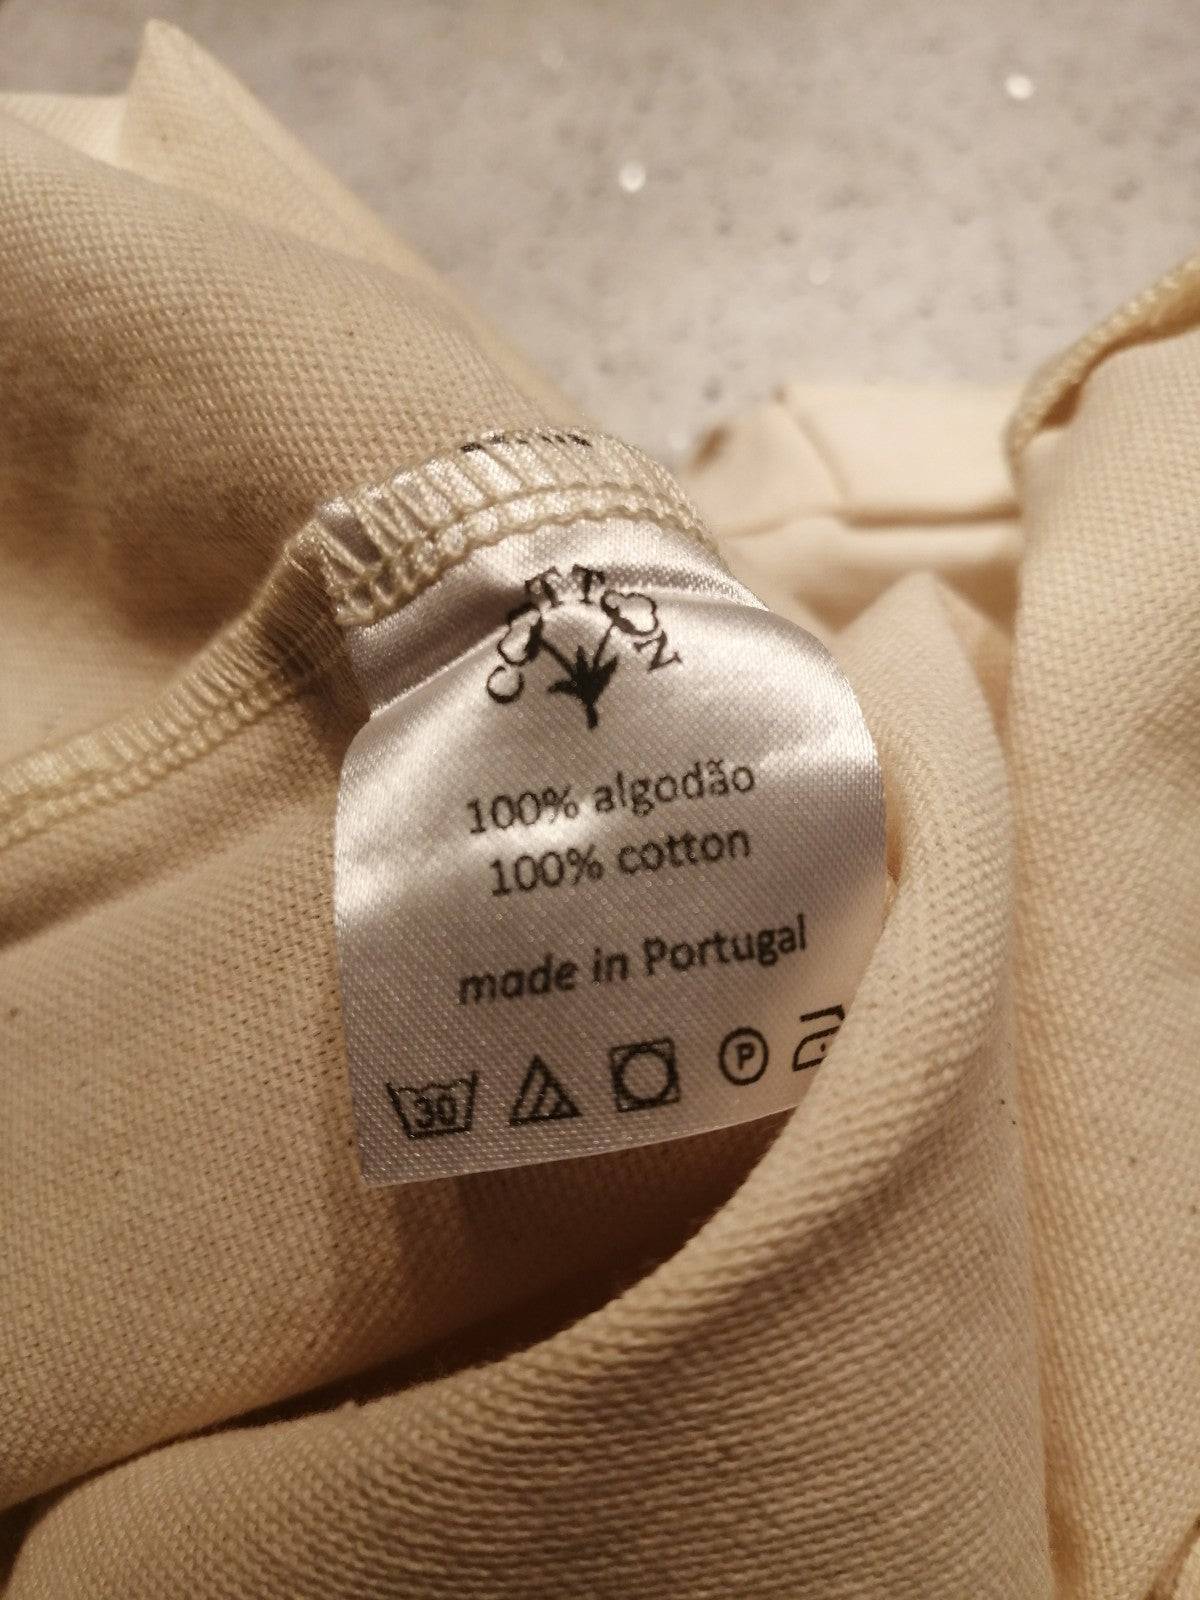 100% cotton. Made in Portugal.